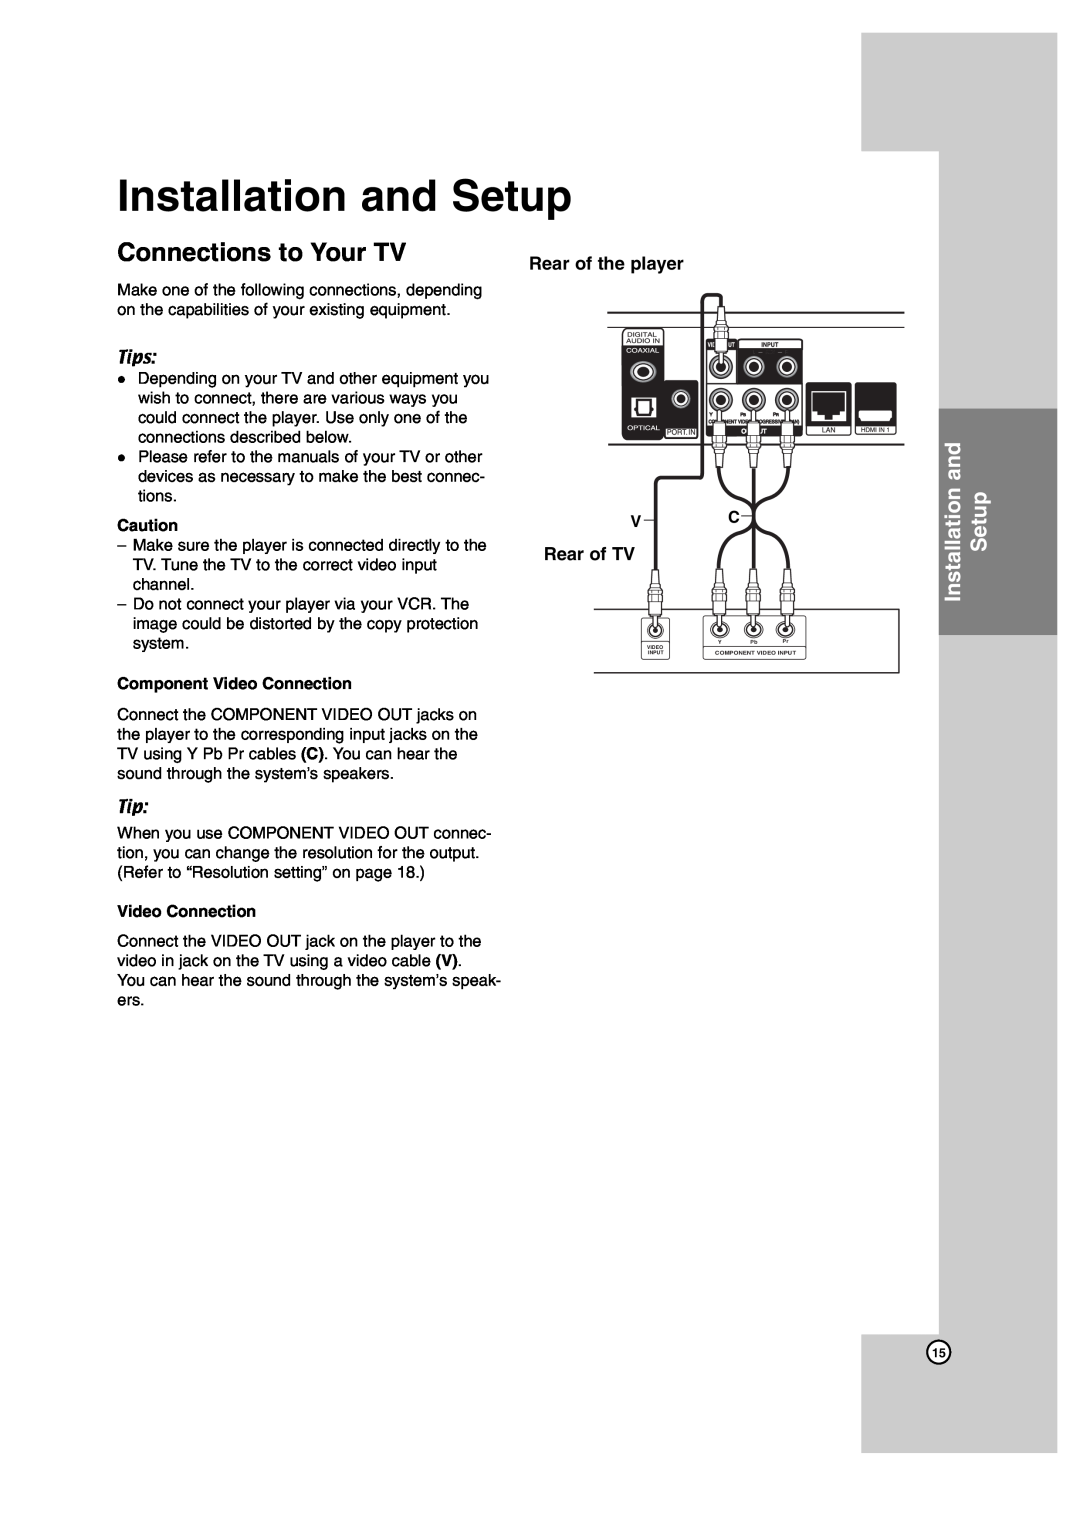 JVC TH-BD50 manual Installation and Setup, Connections to Your TV, Rear of the player, Rear of TV, Tips, Video Connection 